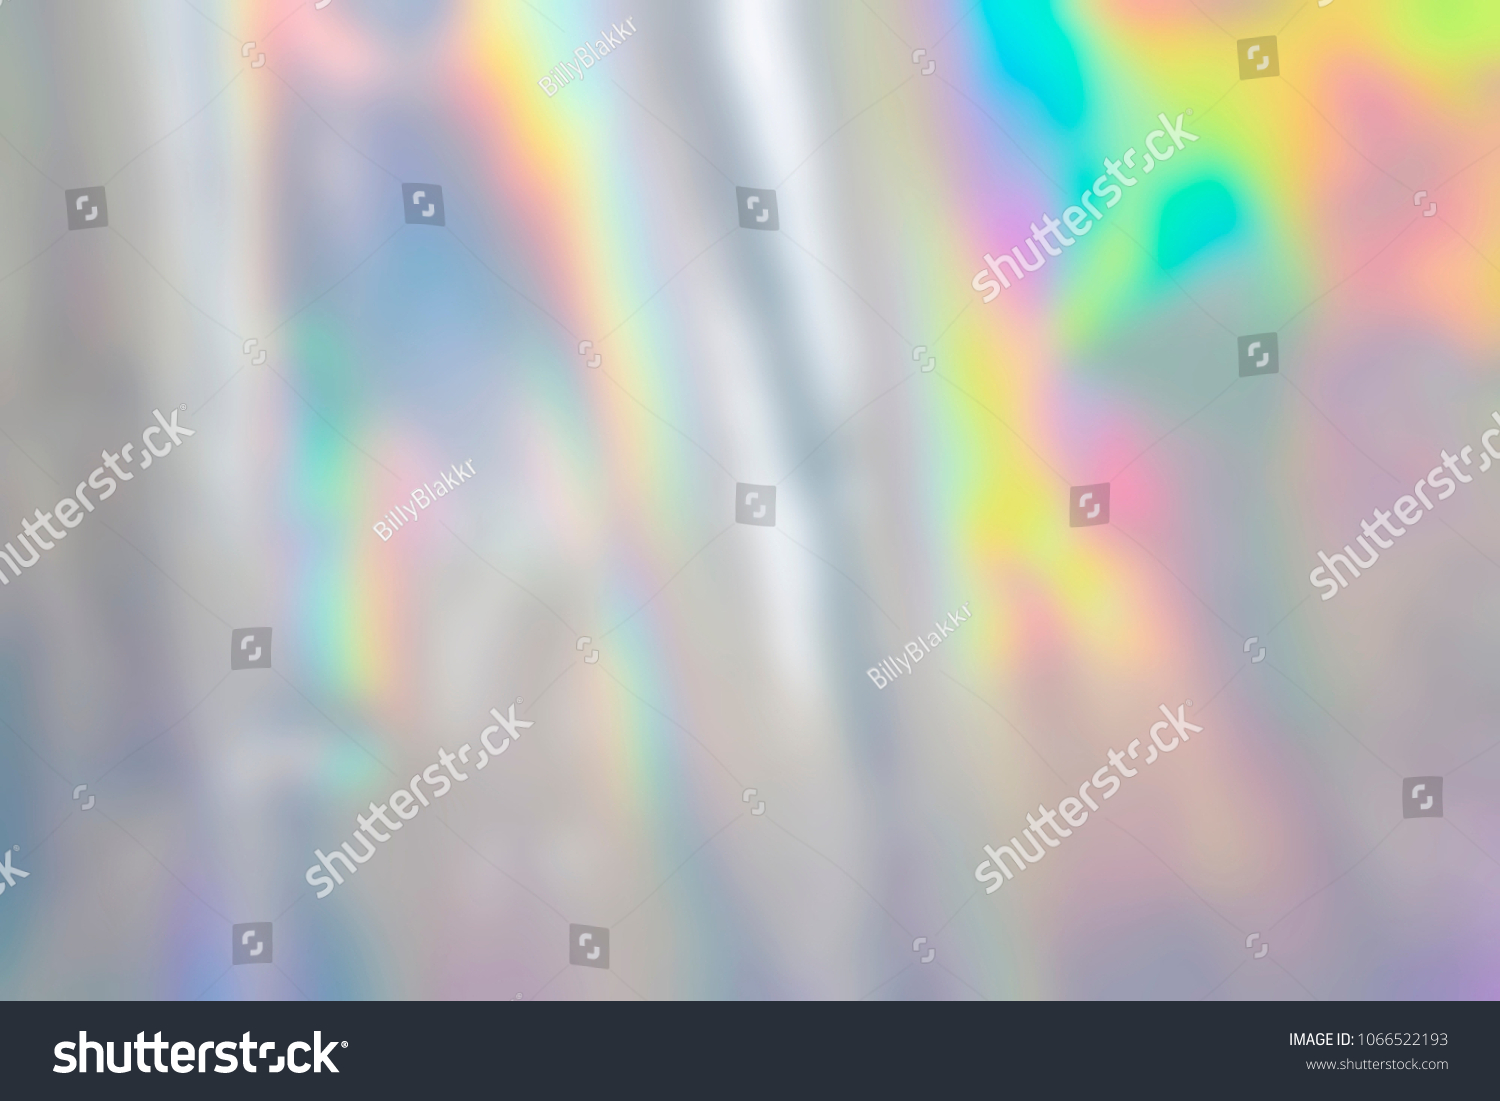 Blurry abstract pastel iridescent holographic foil background #1066522193